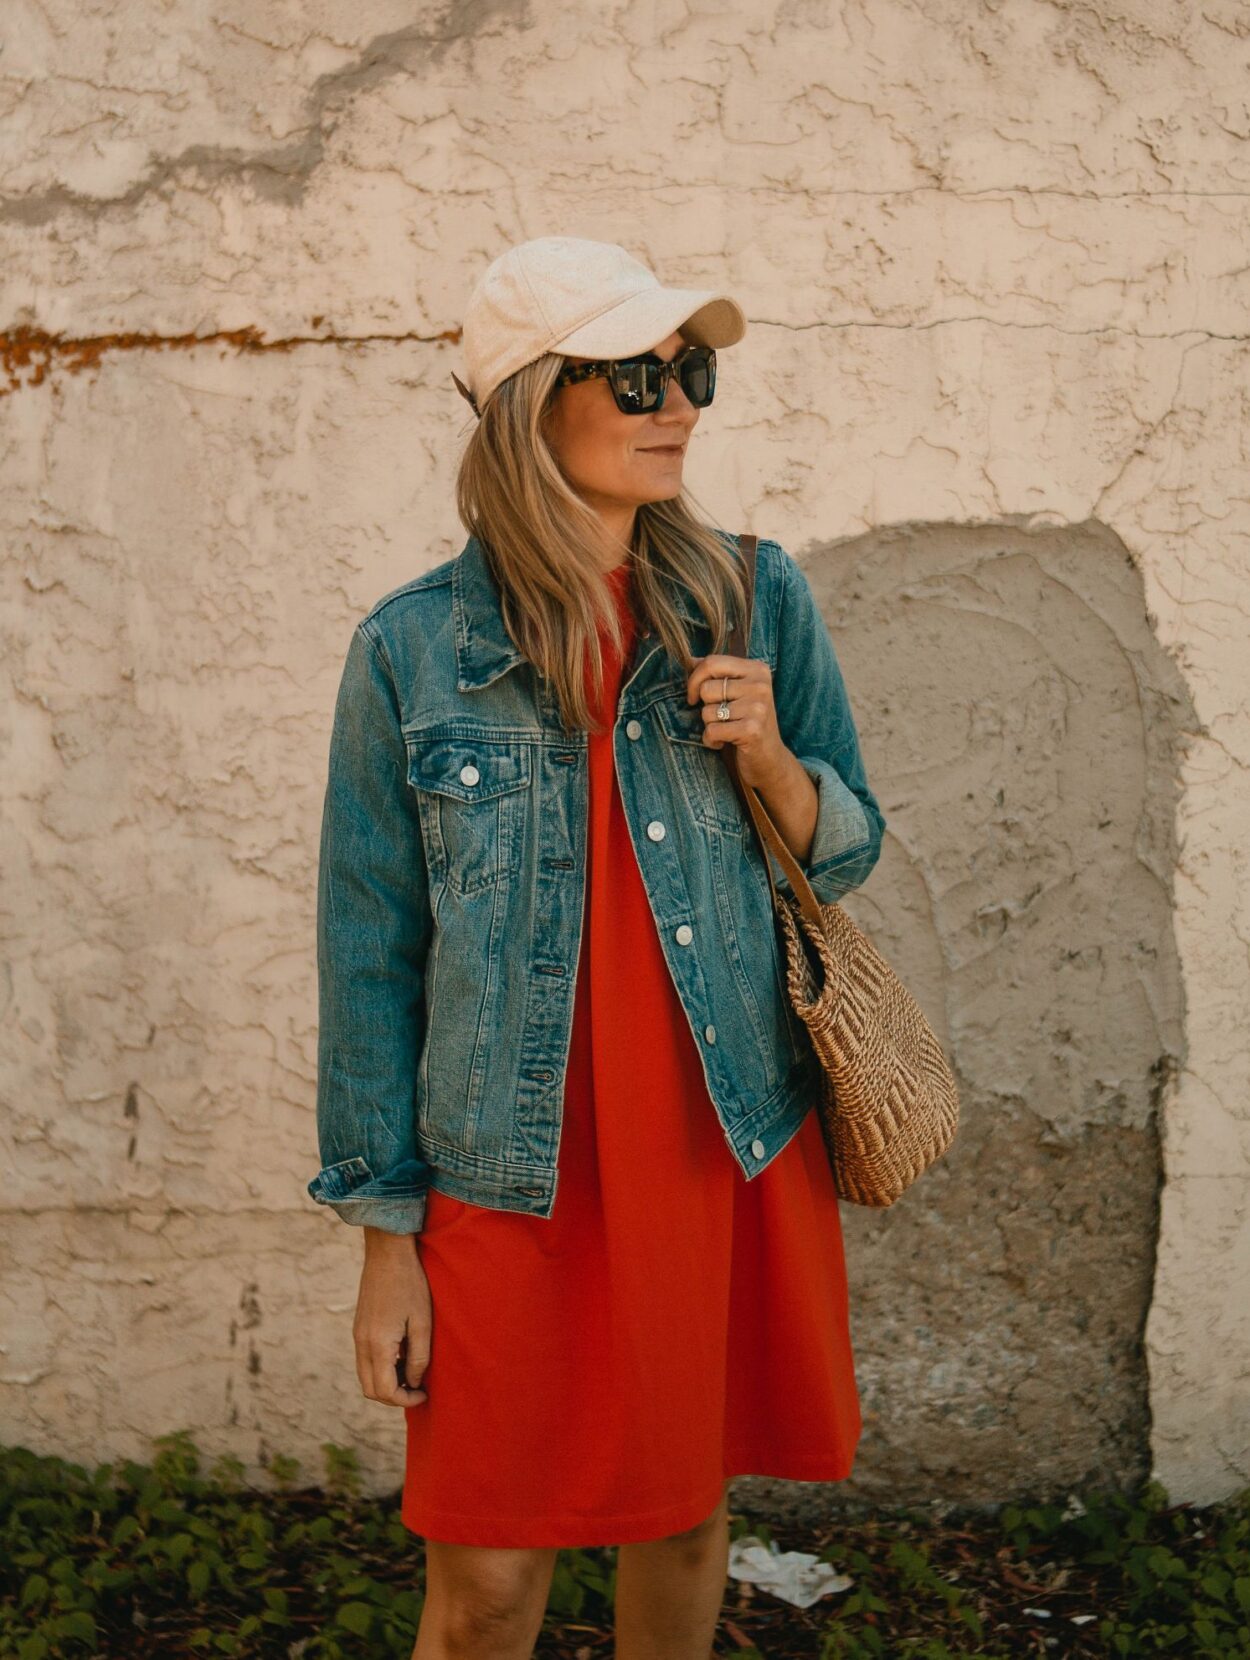 Four 4th of July Outfit Ideas - All Price Points Included!